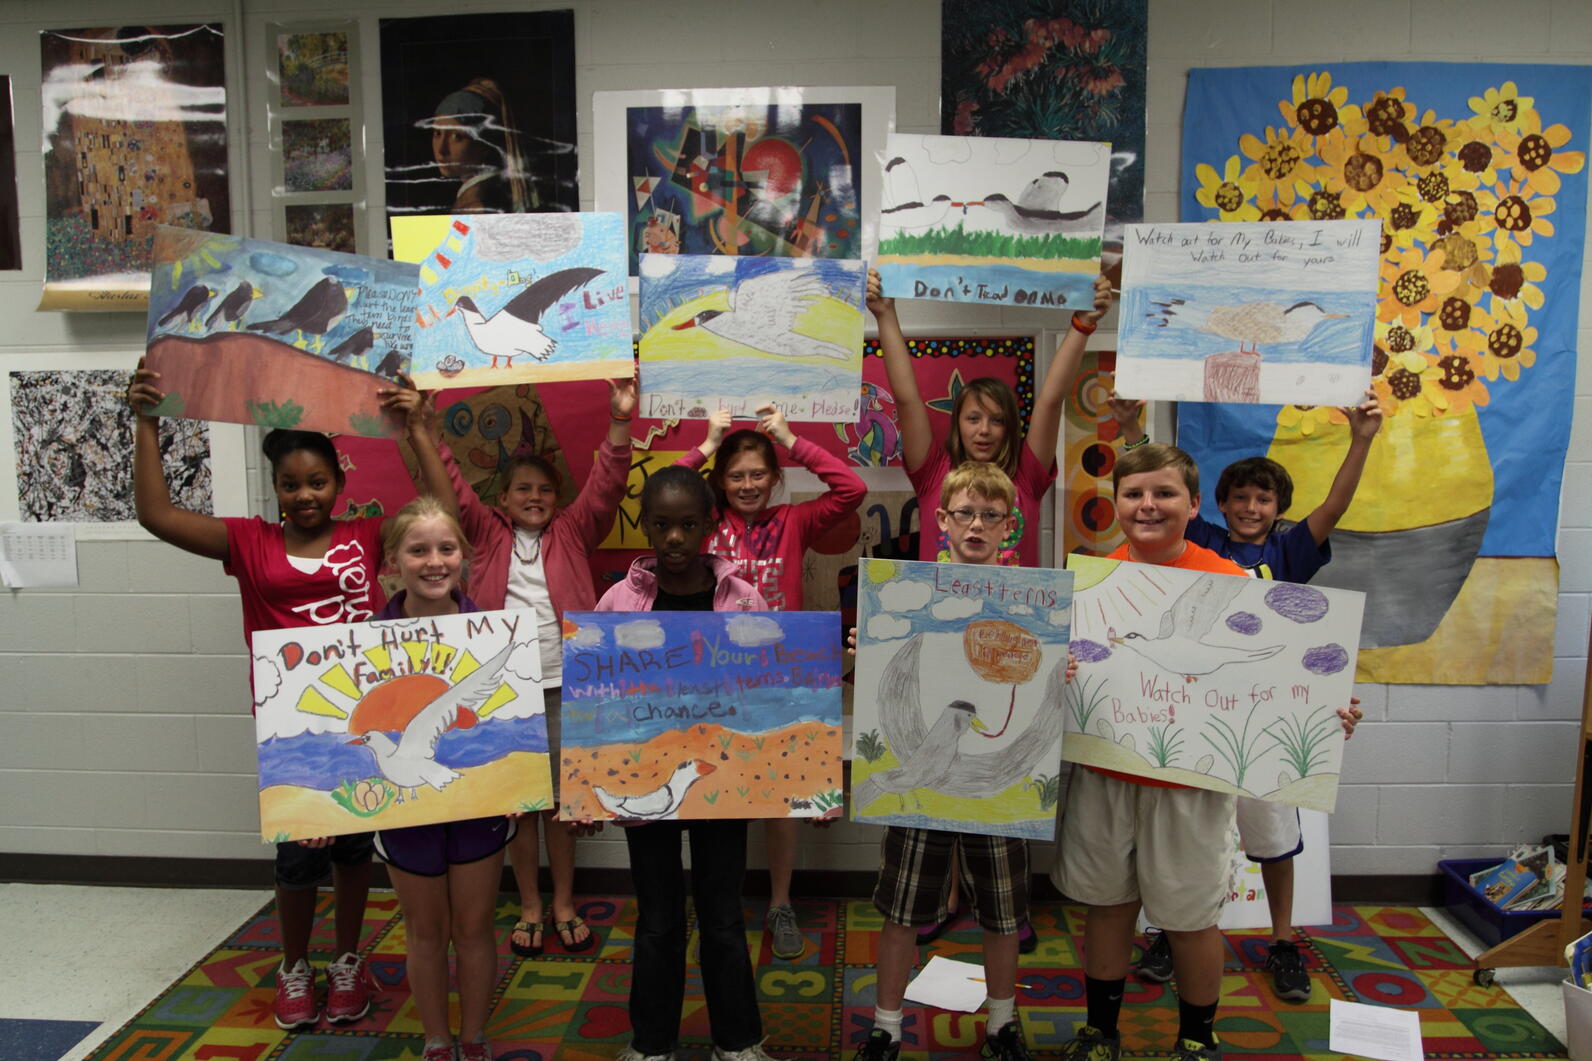 Nine kids hold up their artwork with various messages to protect birds.